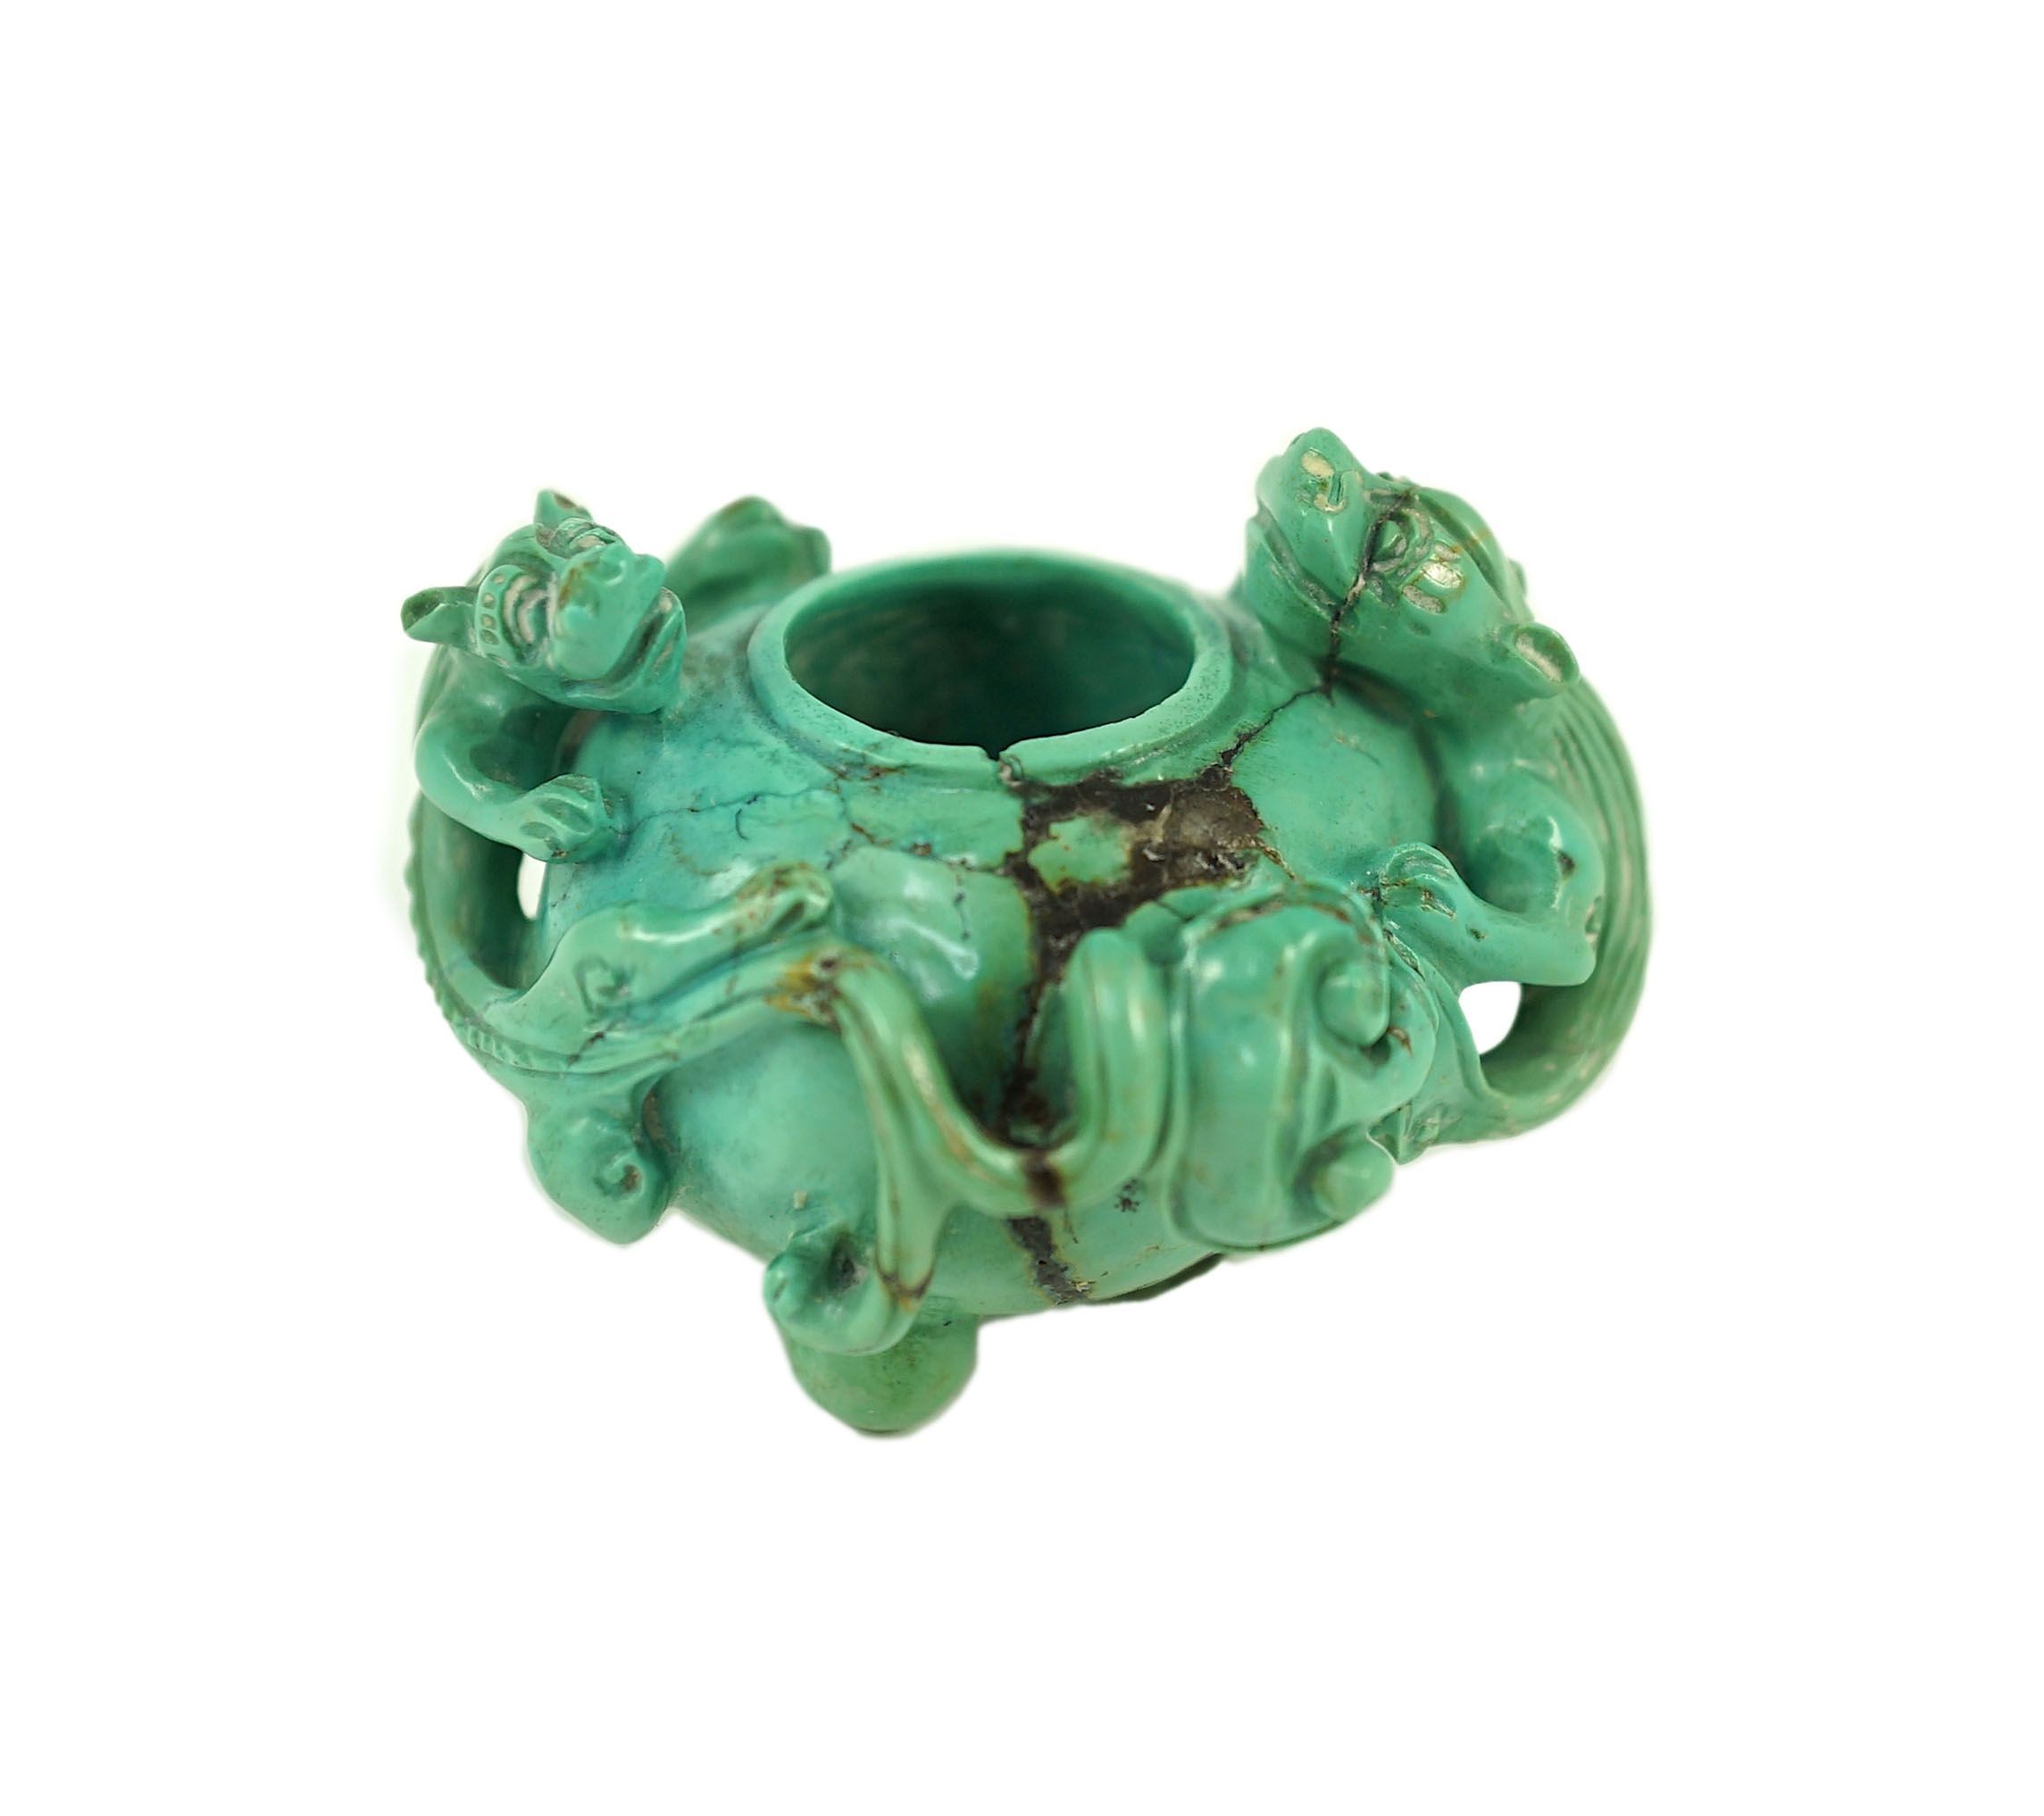 A small Chinese turquoise matrix waterpot, 18th/19th century carved in high relief and open work